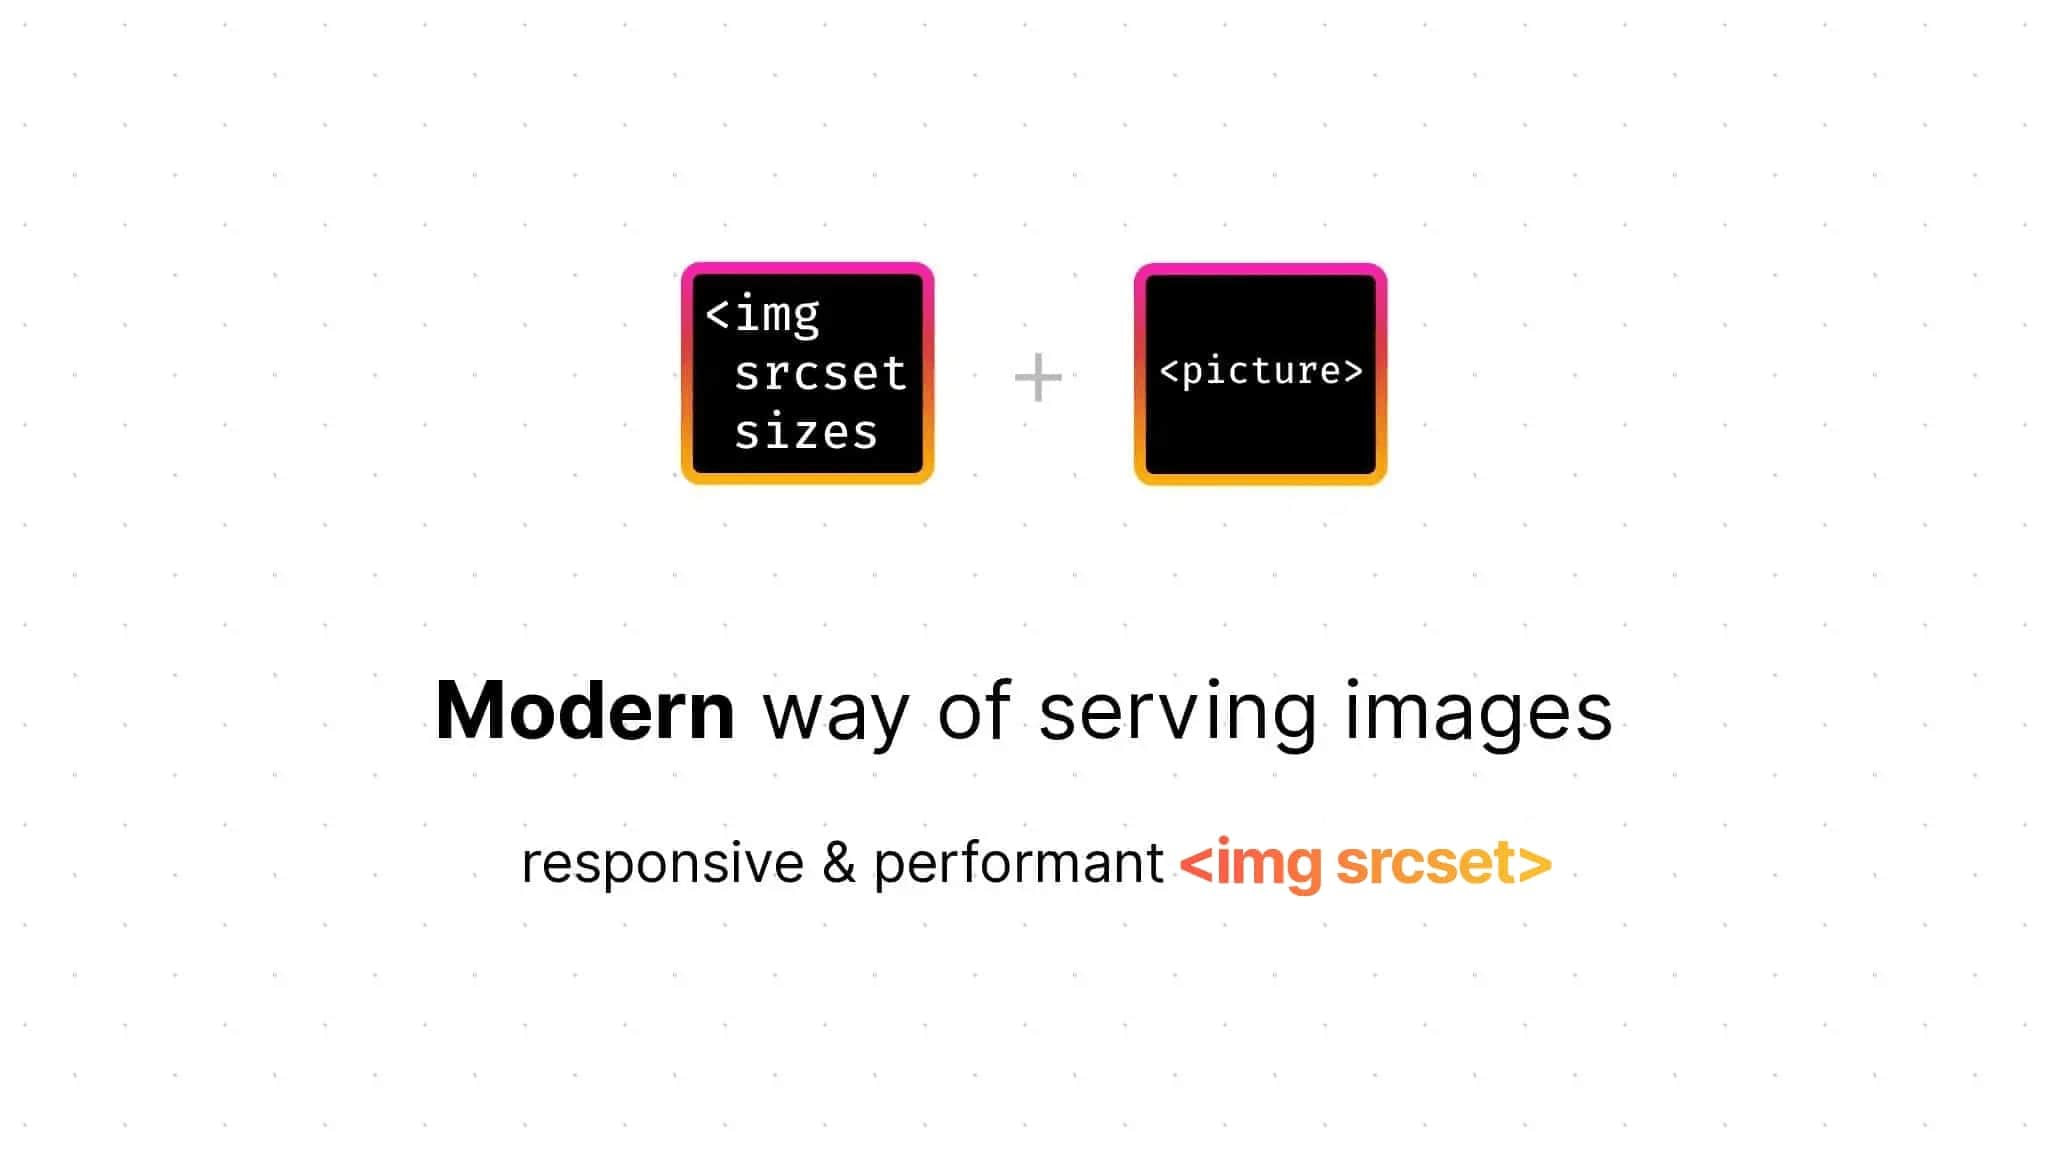 The modern way of serving images